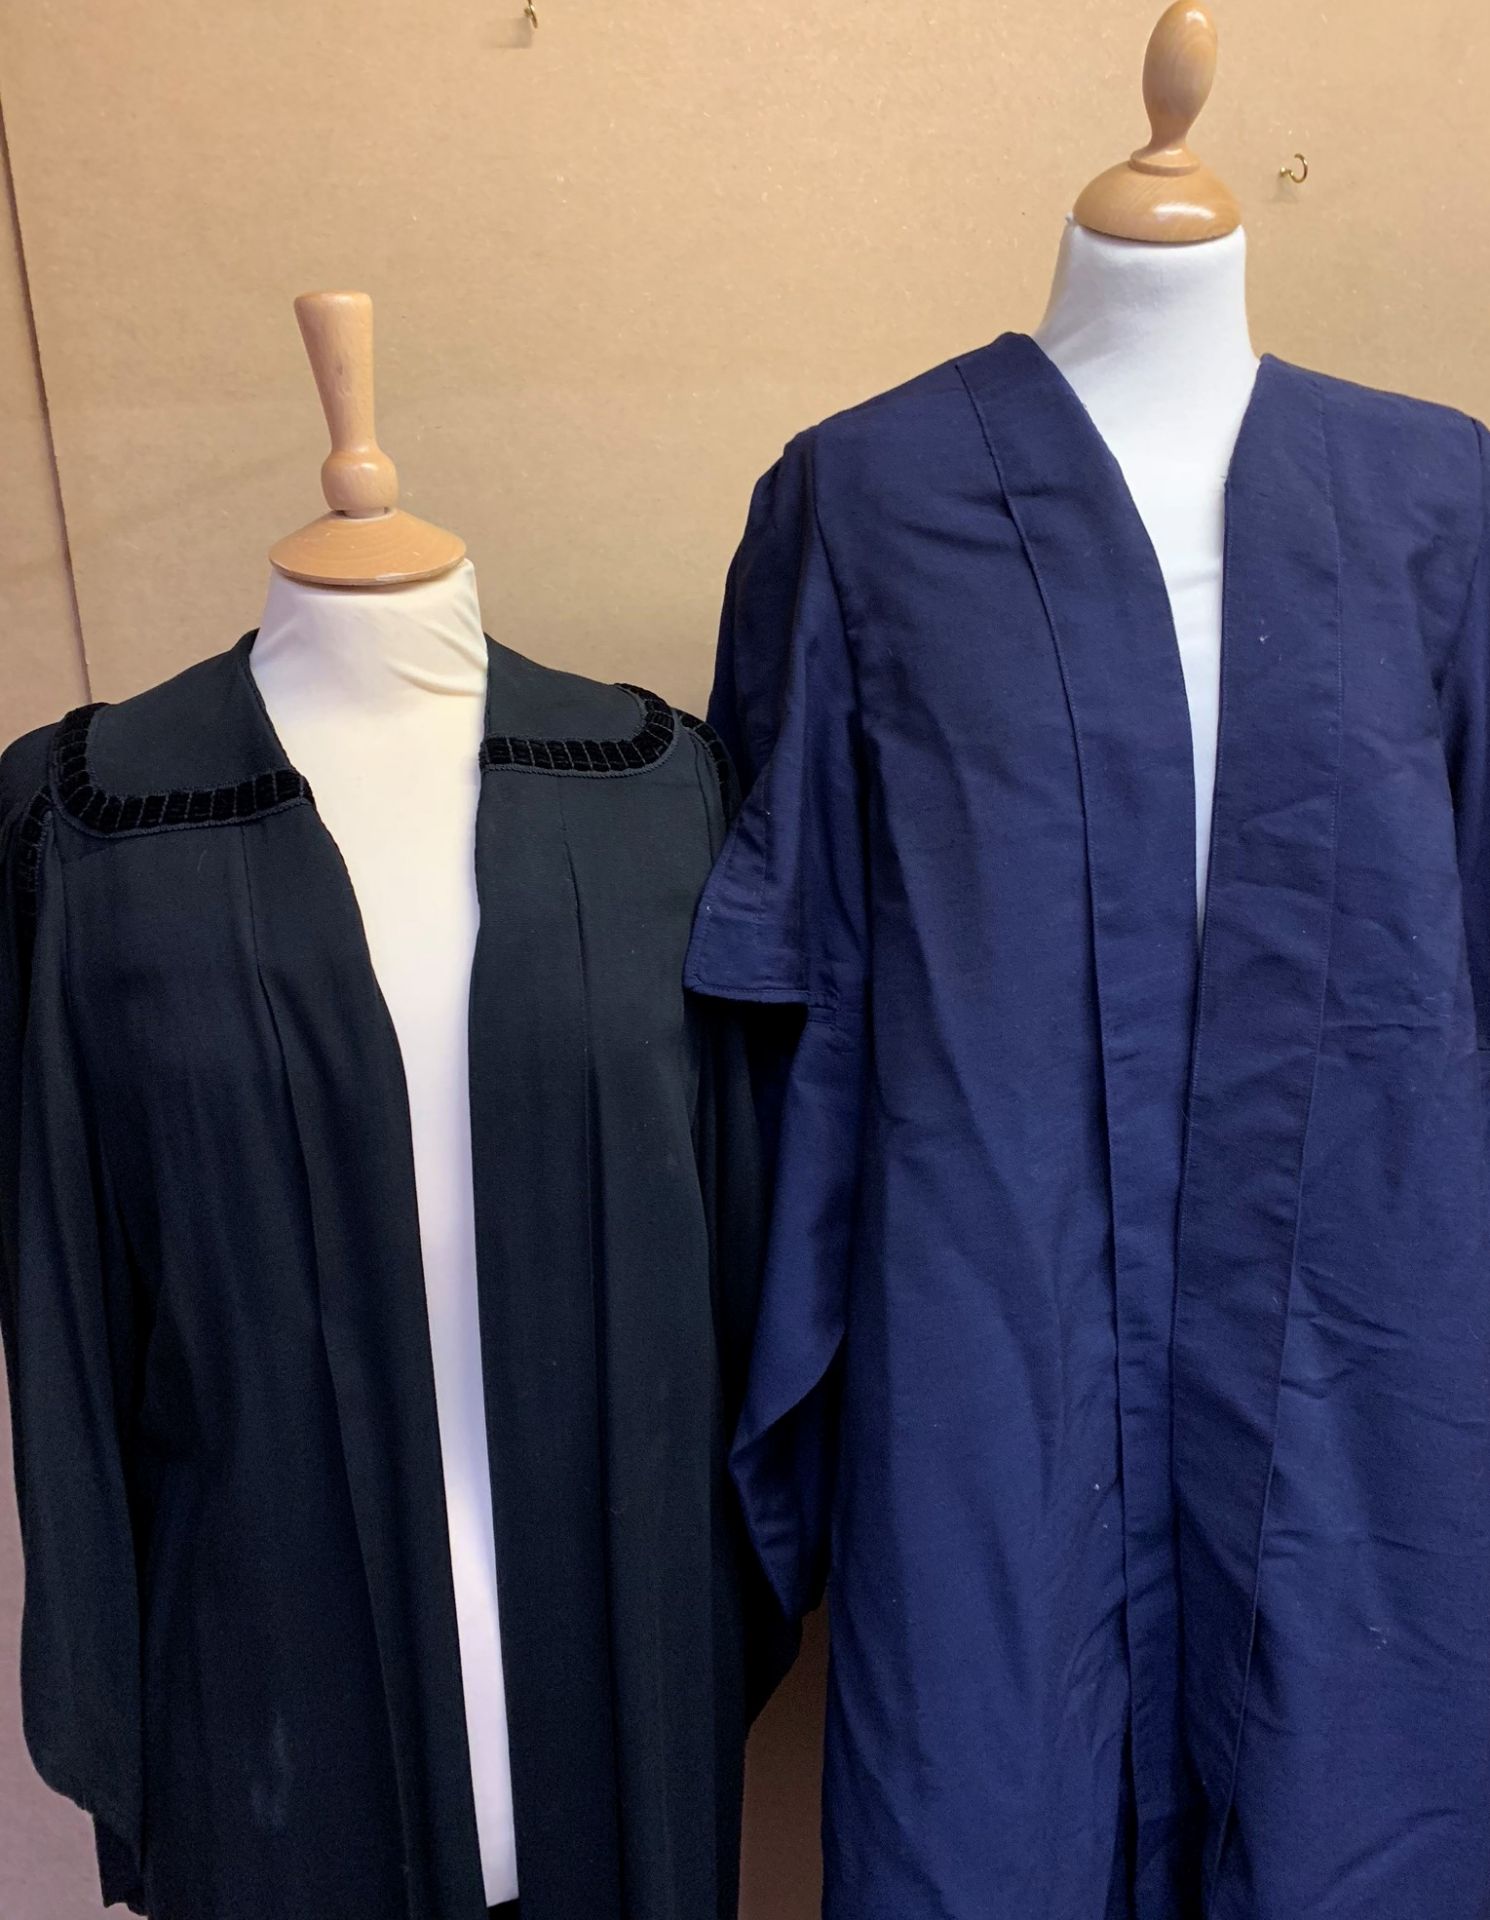 Two masters gowns, black and blue, - Image 2 of 2